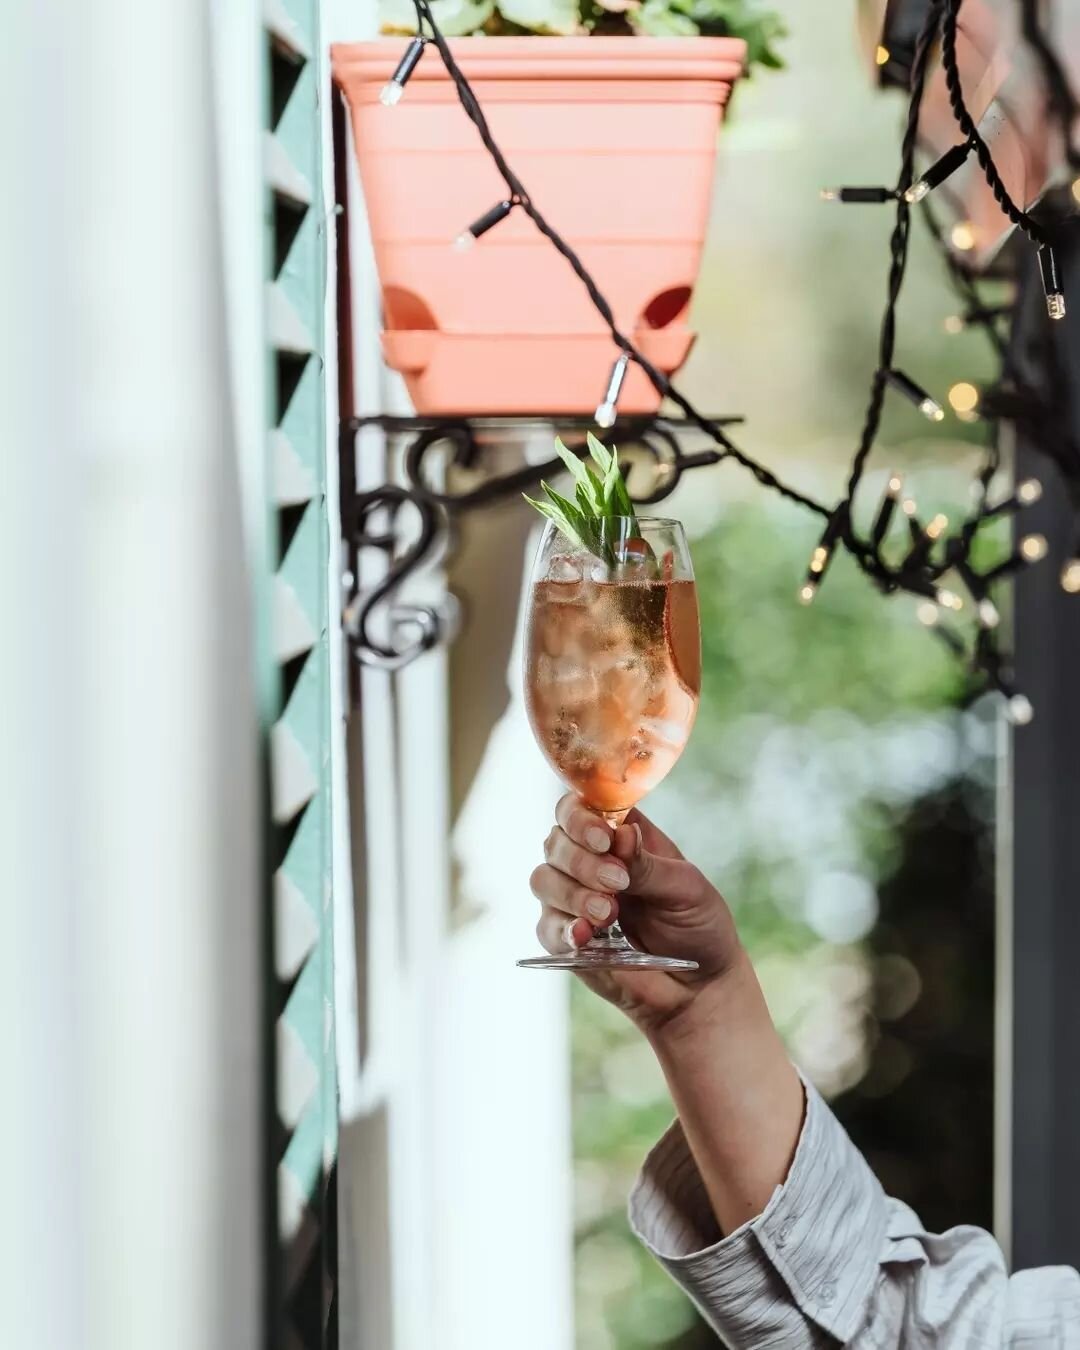 ╠═ APERITIVO TUESDAYS ═╣

Settle in for a spritz and enjoy special bite sized snacks.

Every Tuesday. Book in for next week via link in bio.